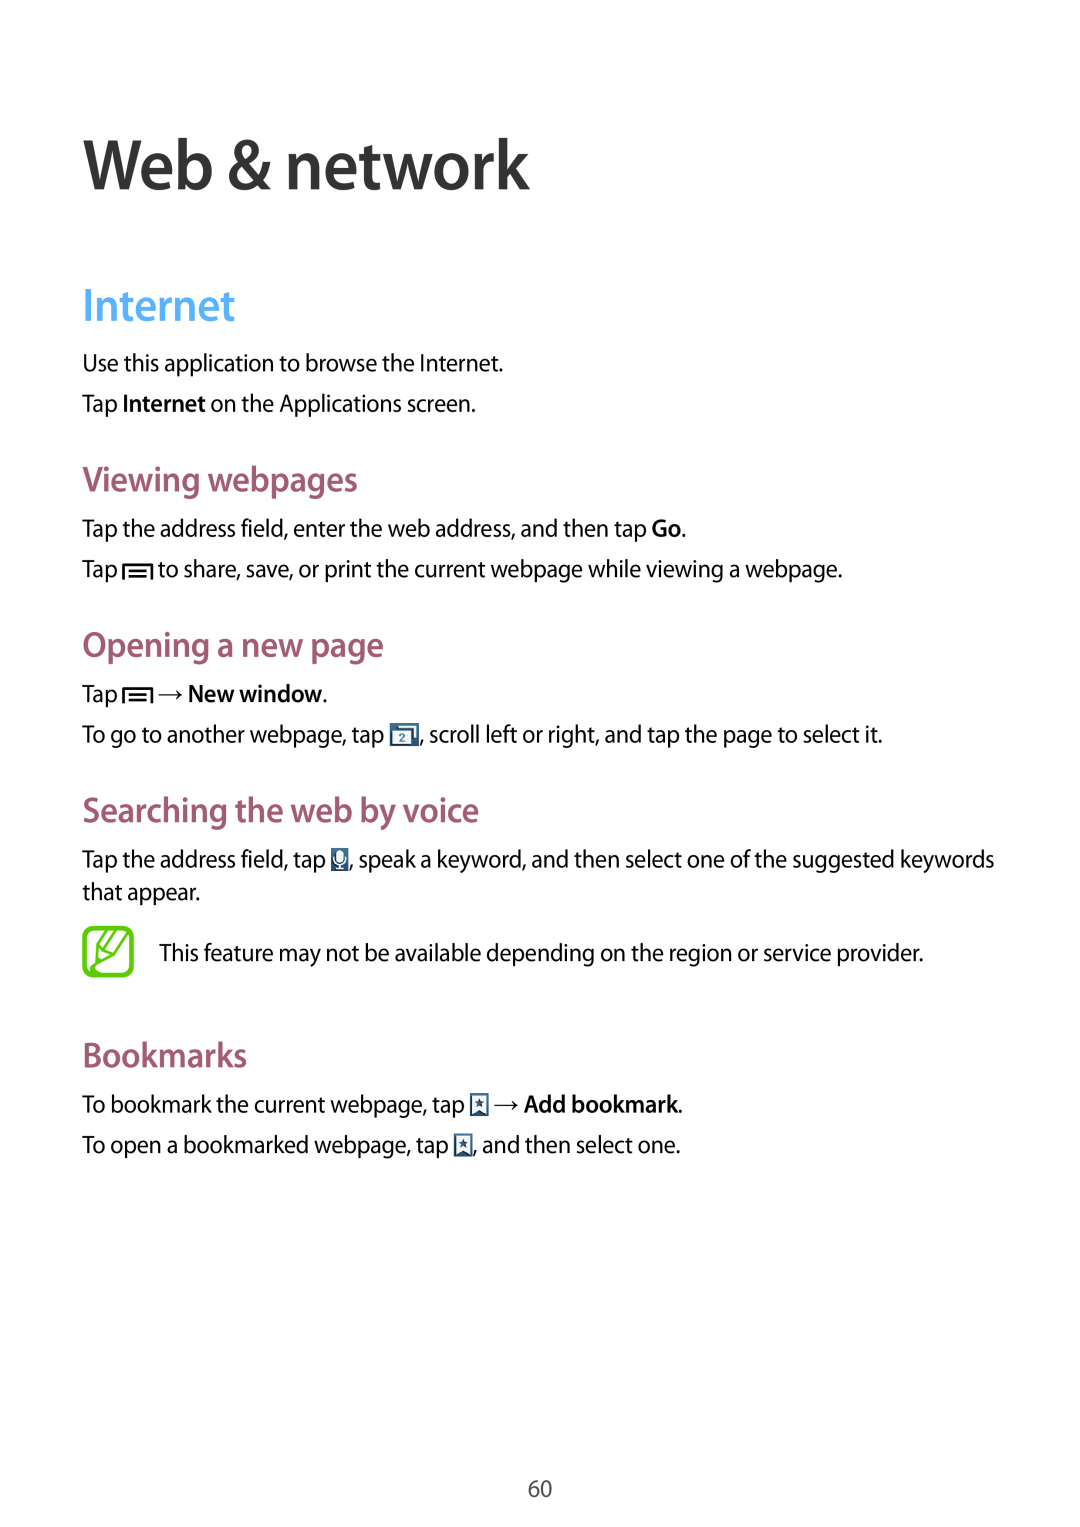 Samsung GT2I8190RWNETL manual Web & network, Internet, Viewing webpages, Opening a new page, Searching the web by voice 